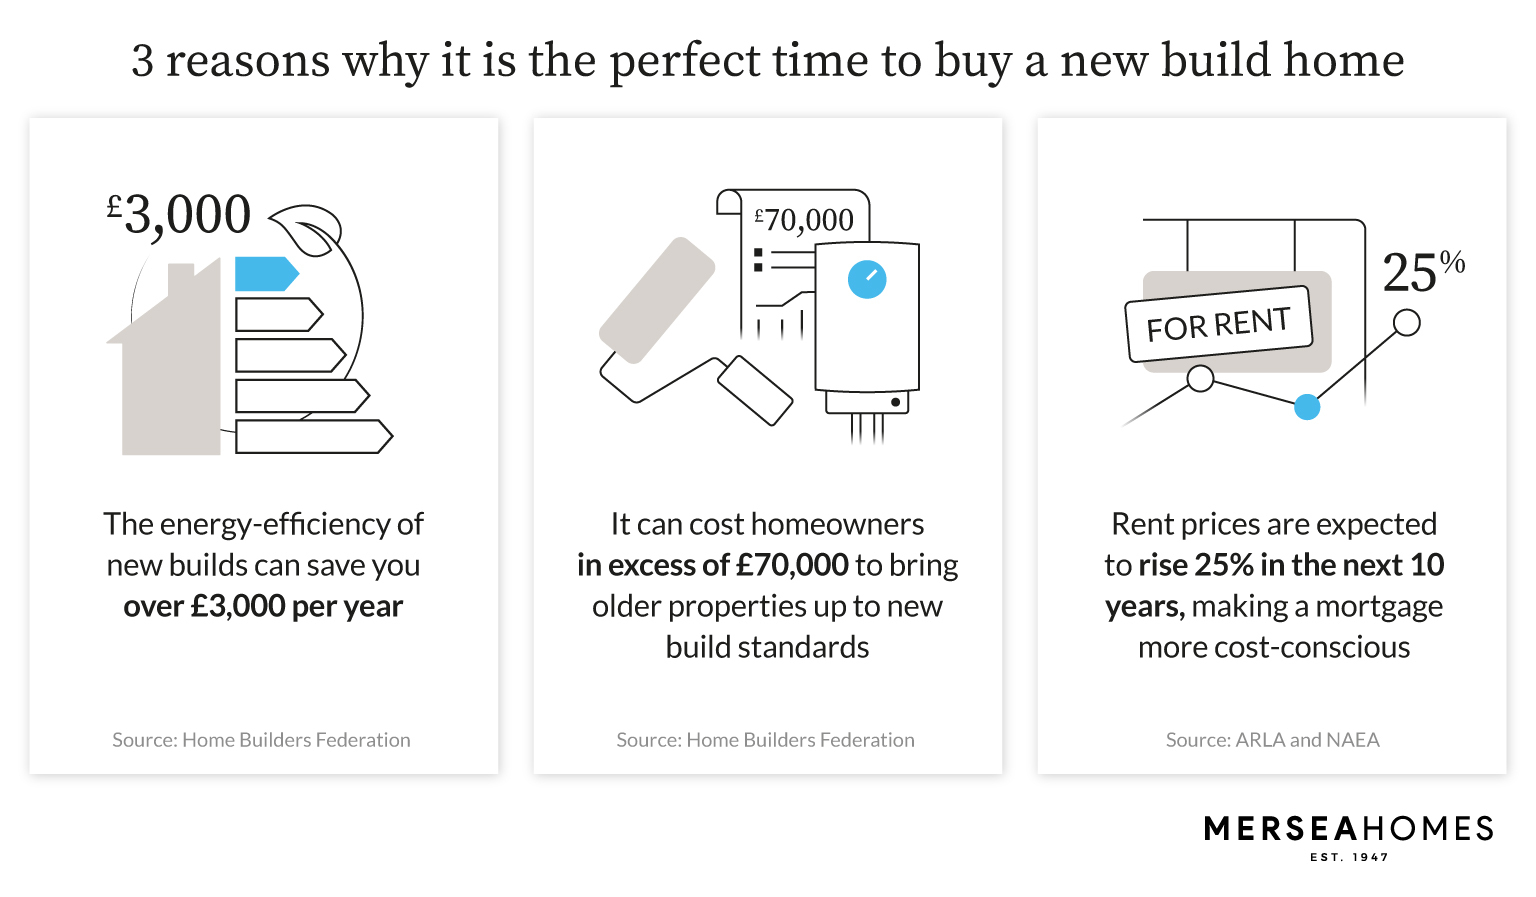 3 reasons why it is a perfect time to buy a new build home